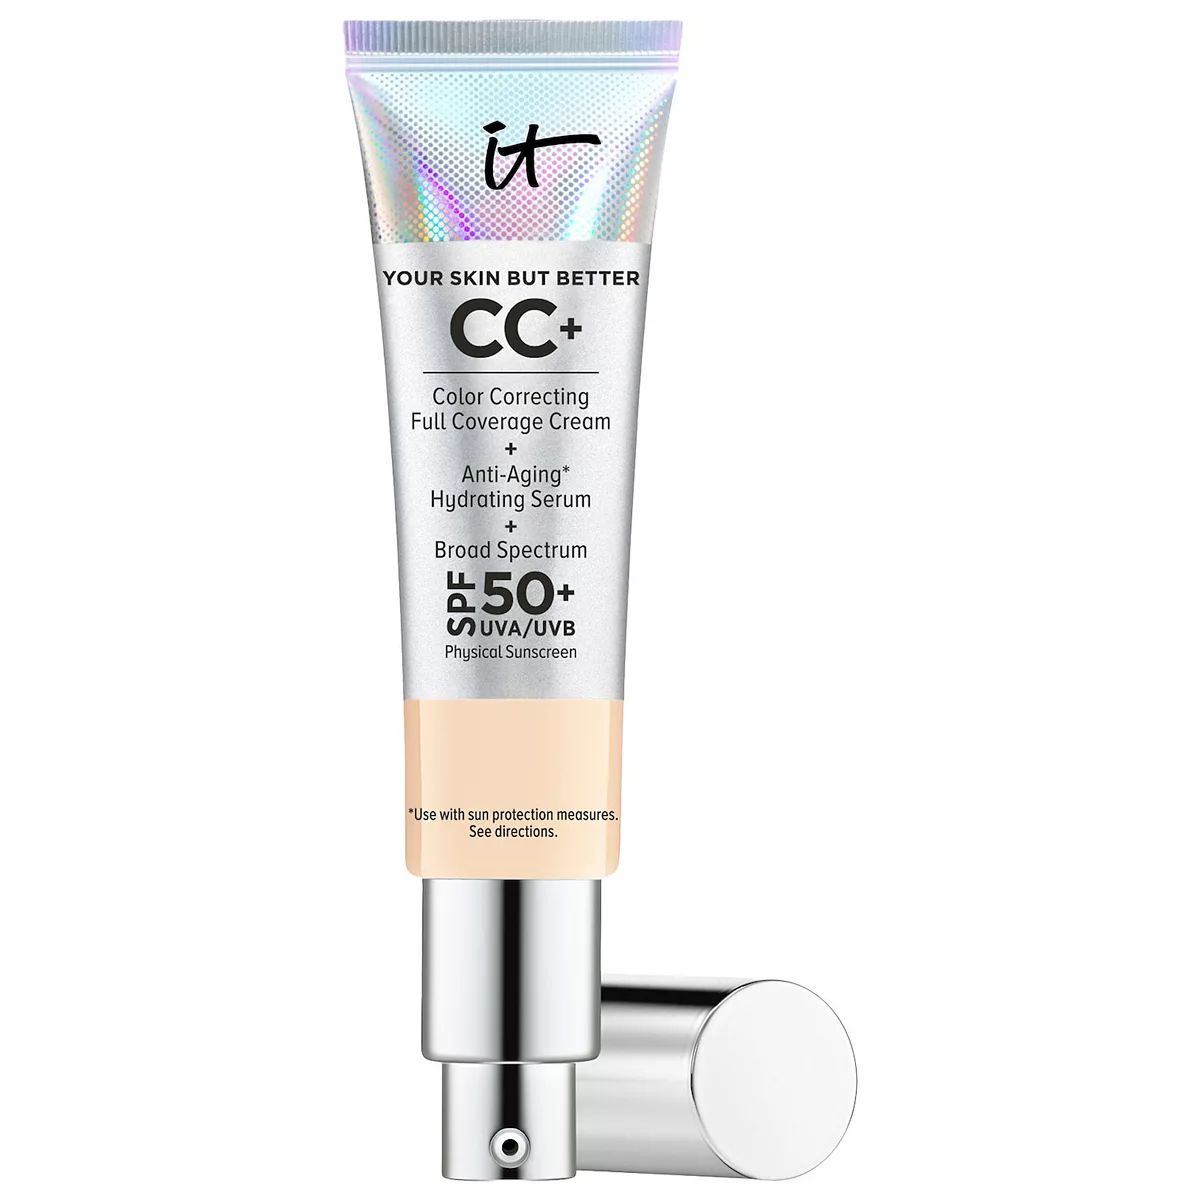 IT Cosmetics CC+ Cream Full Coverage Color Correcting Foundation with SPF 50+ | Kohl's